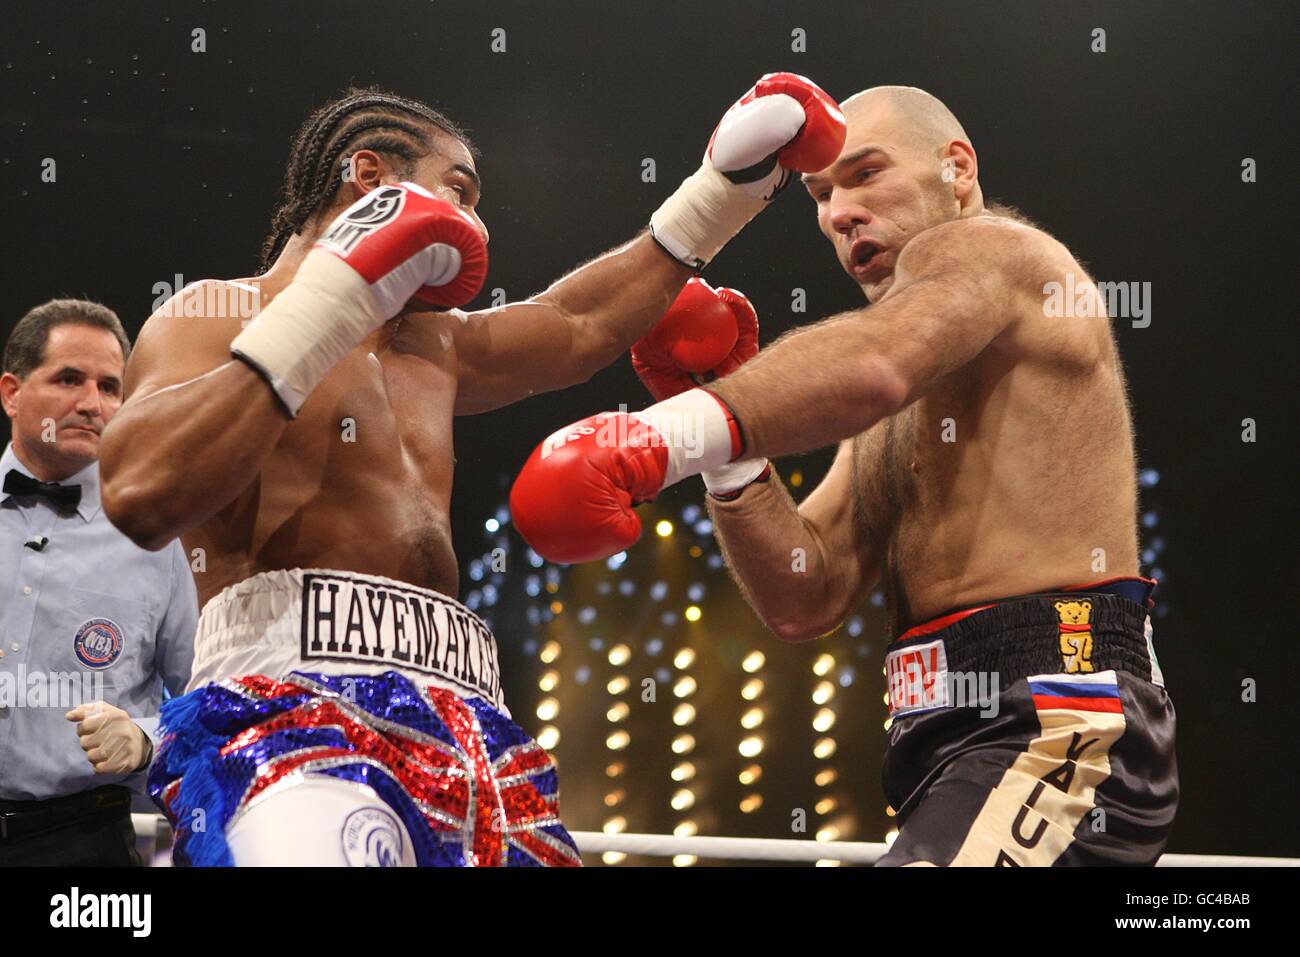 England's David Haye (left) and Russia's Nikolai Valuev trade blows during the WBA World Heavyweight title fight at the Nuremberg Arena, Germany Stock Photo